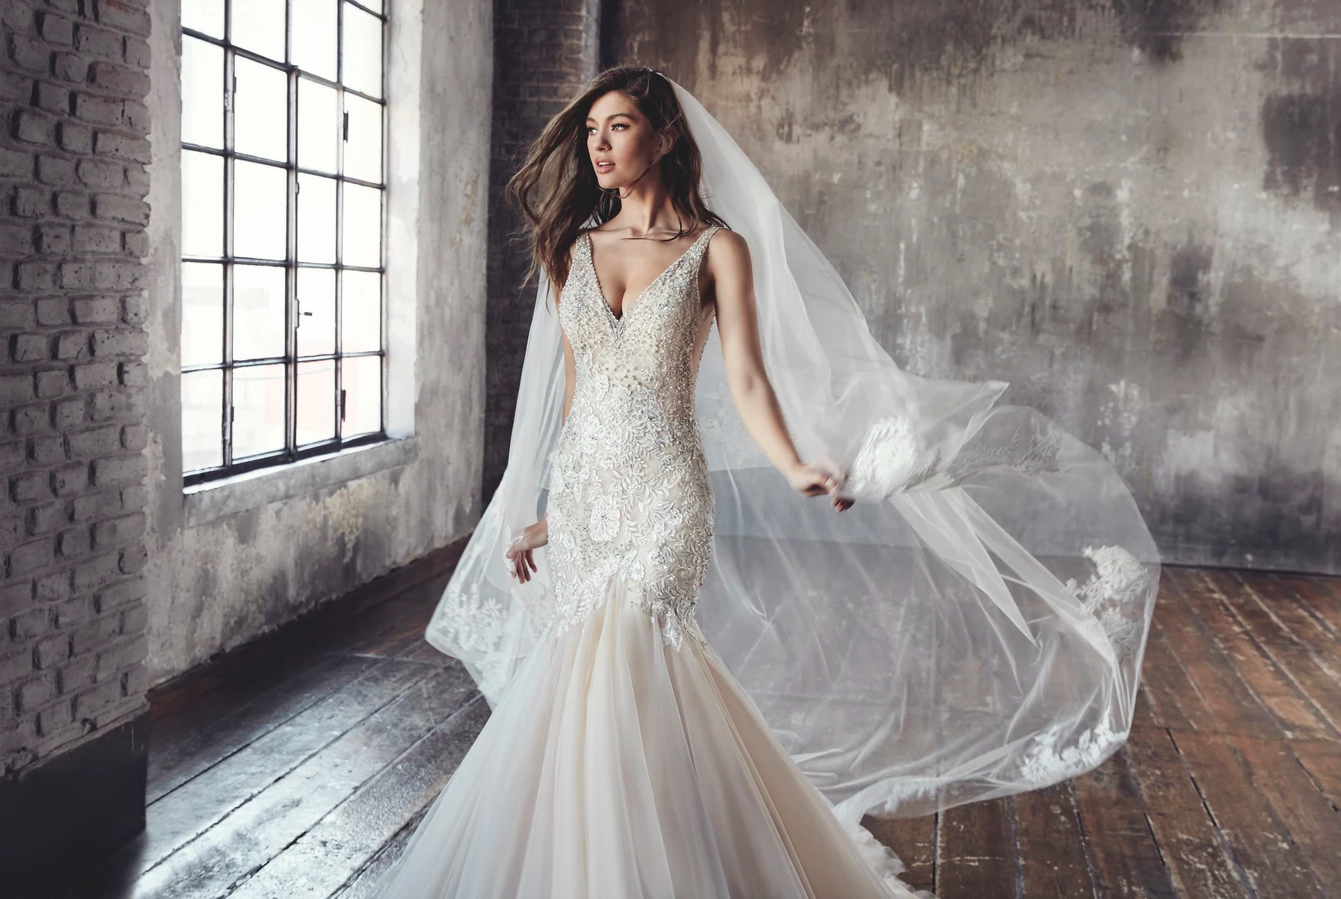 Every Bride Dreams of Having the Perfect Dresses